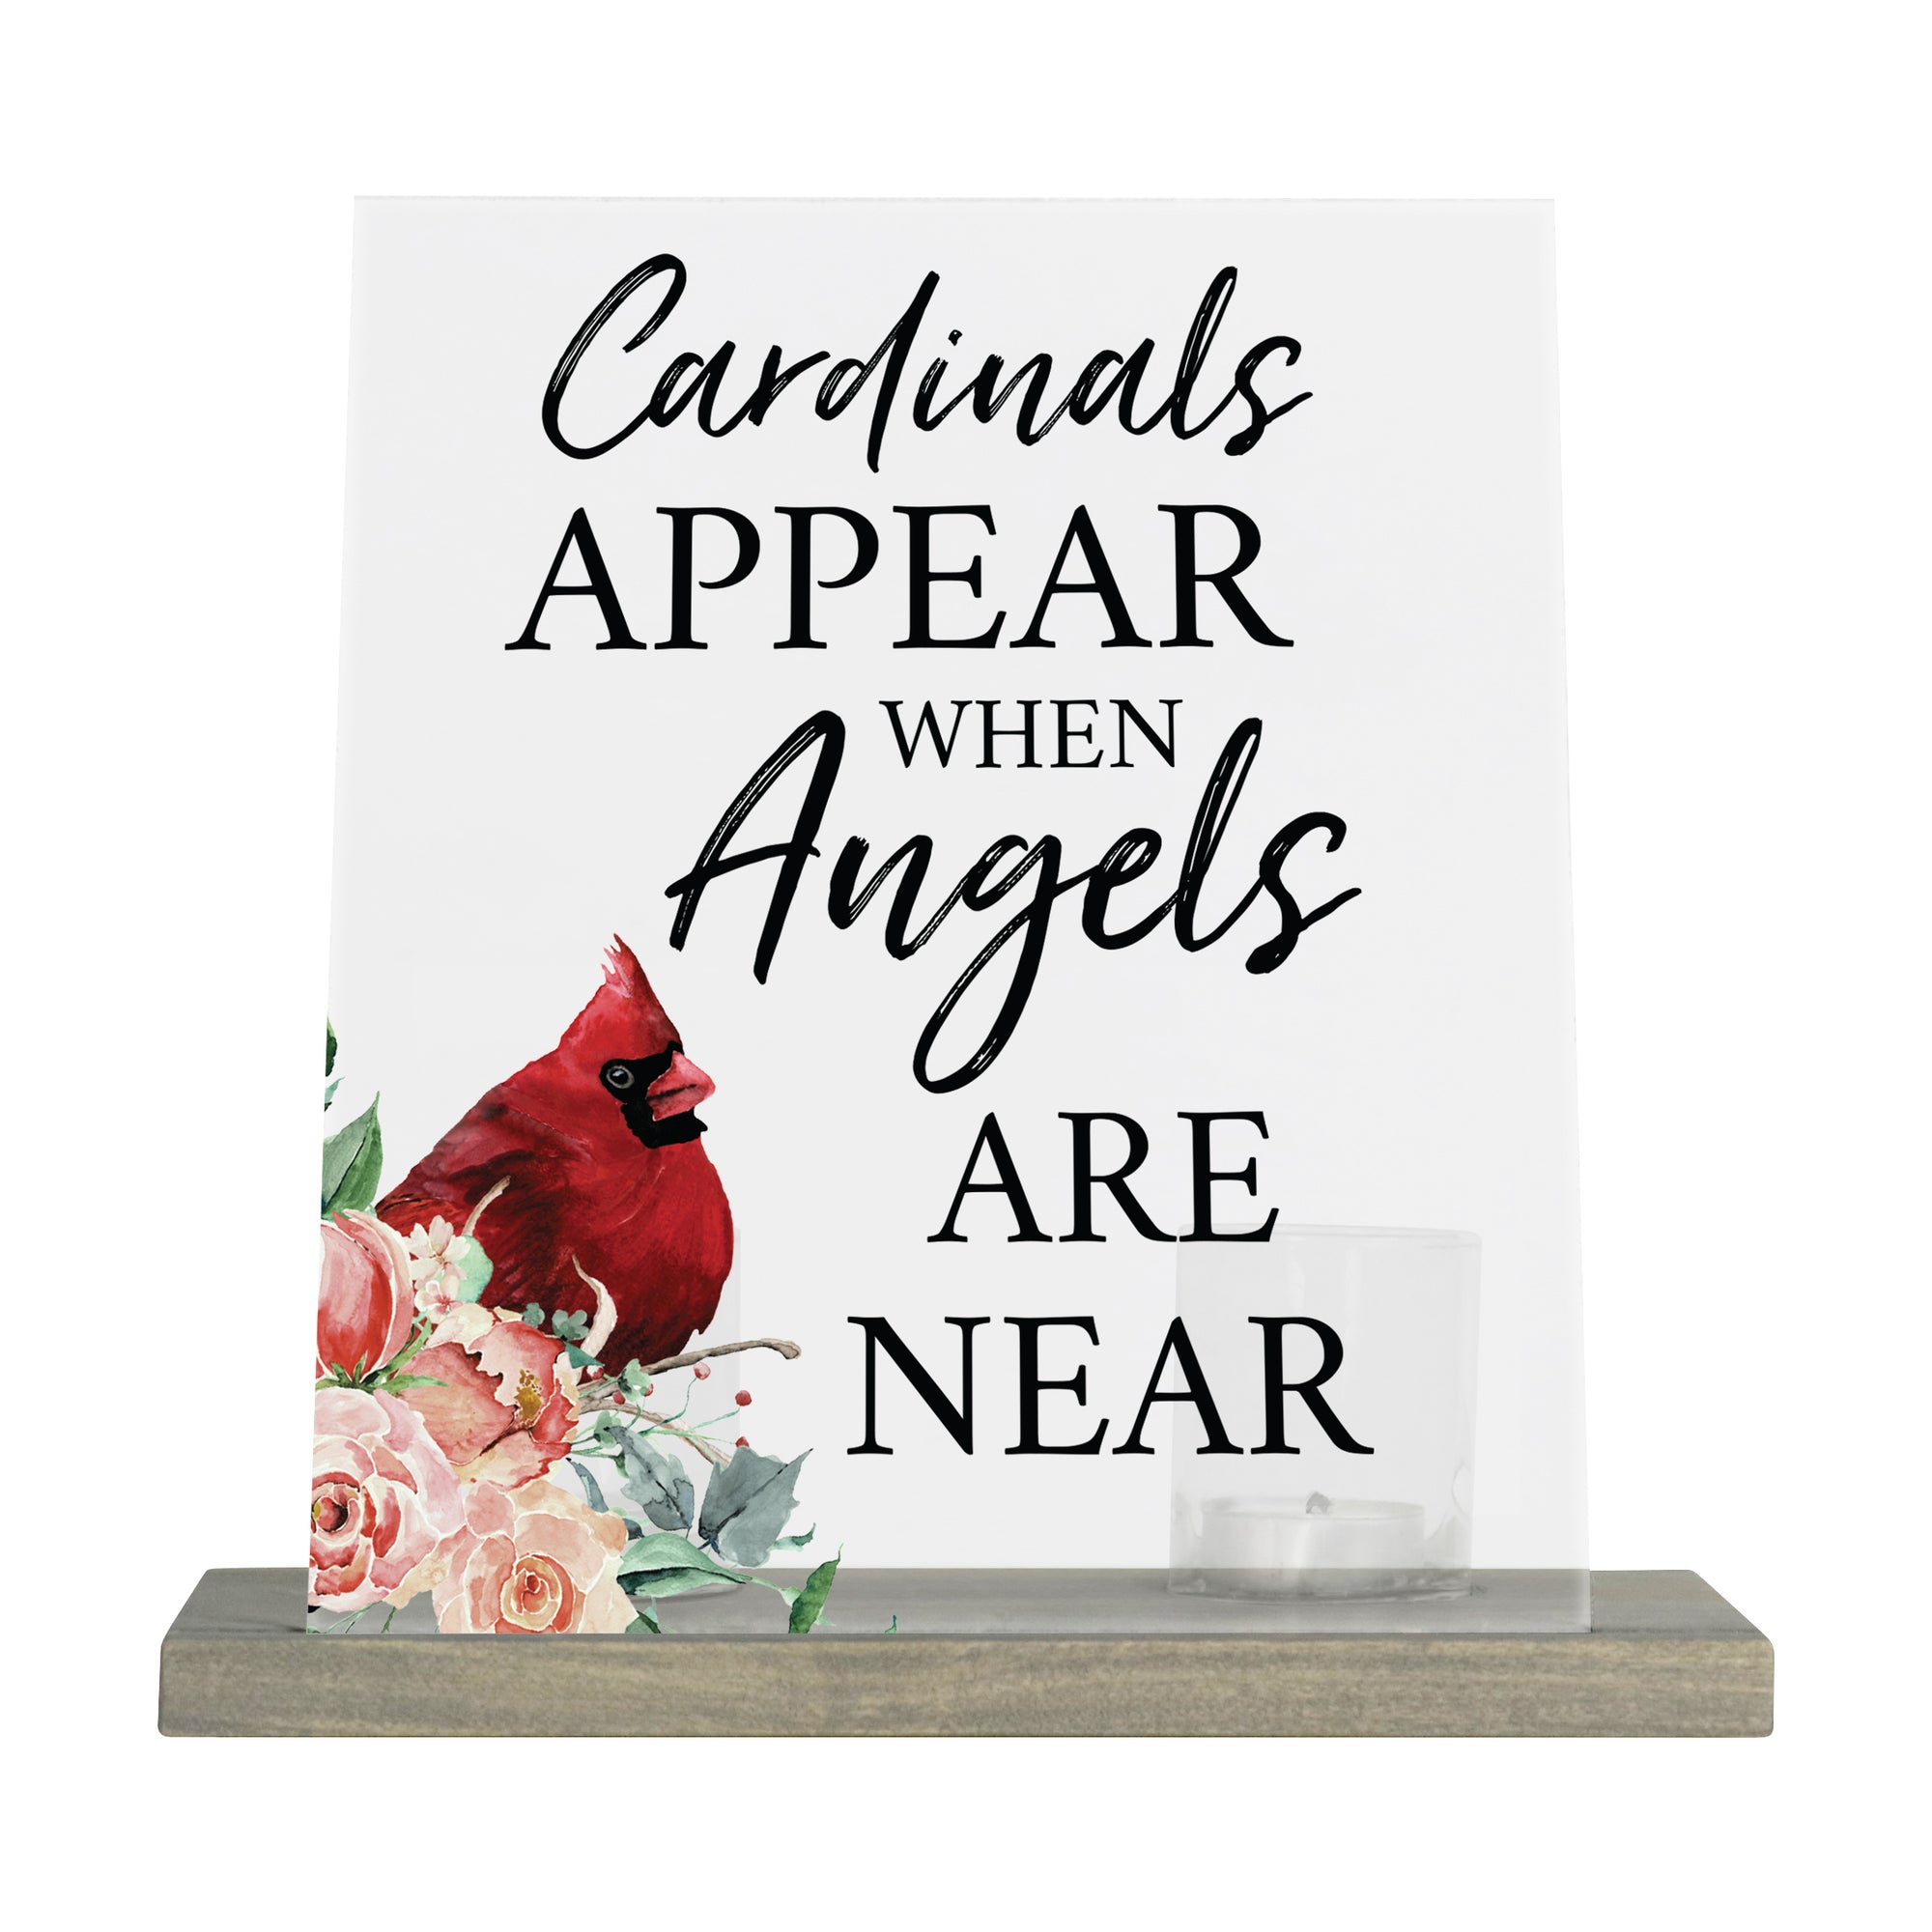 LifeSong Memorials Vintage Memorial Cardinal Acrylic Sign Candle Holder With Wood Base And Glass Votives For Home Decor | Cardinal Appears. Acrylic candle holders, Vintage acrylic candle holders, glass candle holders for Living Room, Bedroom, Kitchen, Dining Room, and Entryways decor perfect memorial bereavement keepsake gift ideas for Family & Friends.